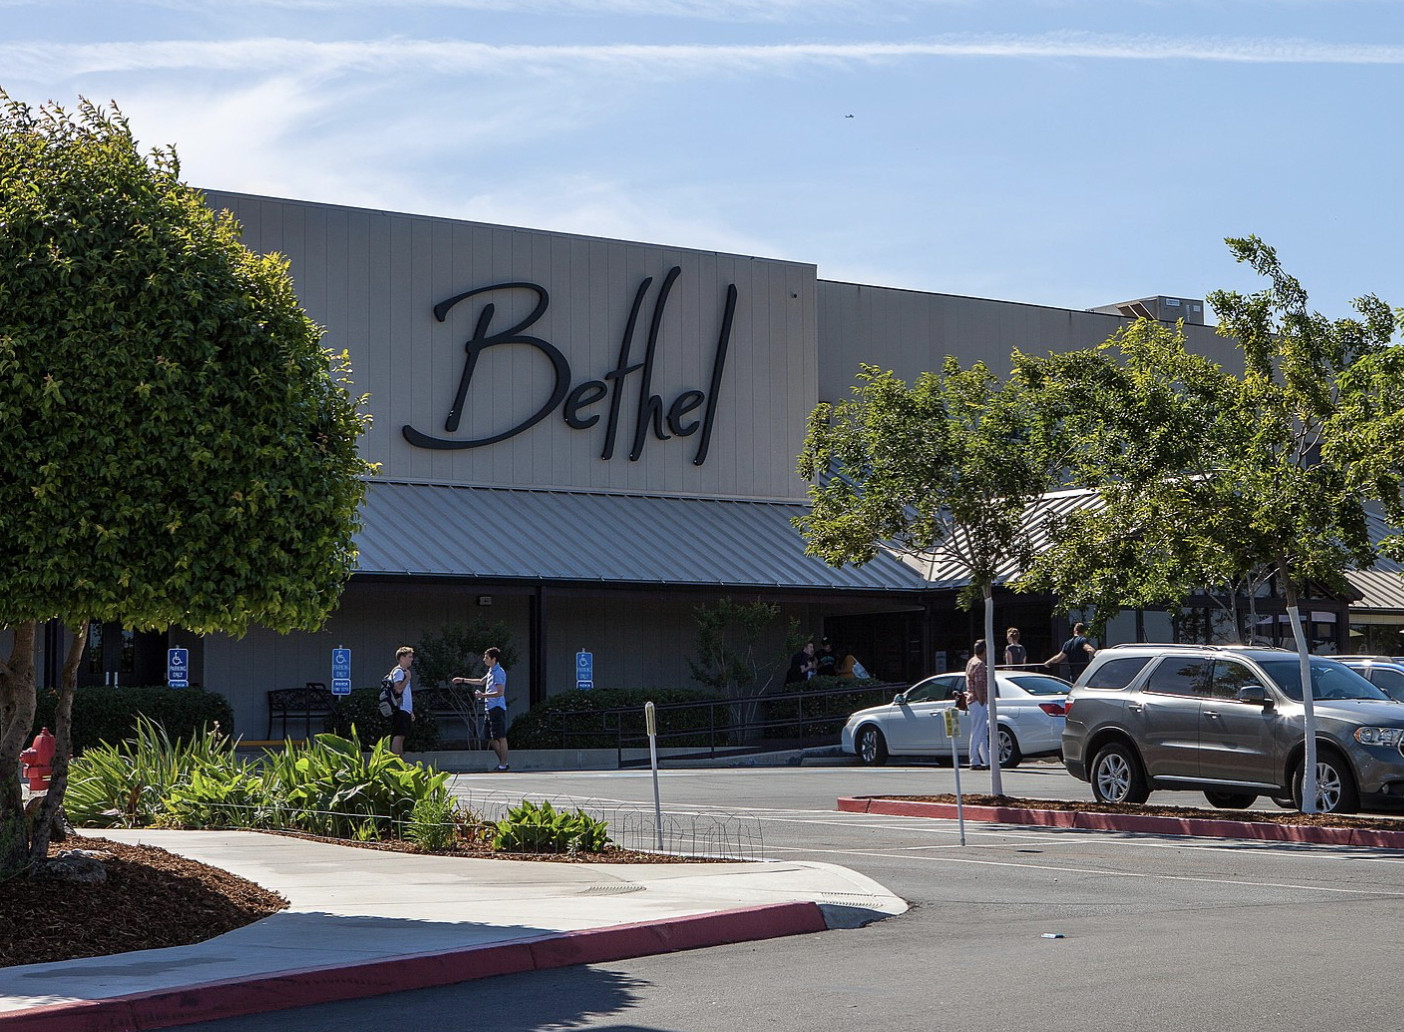 Bethel Have on Redding City Council – MinistryWatch